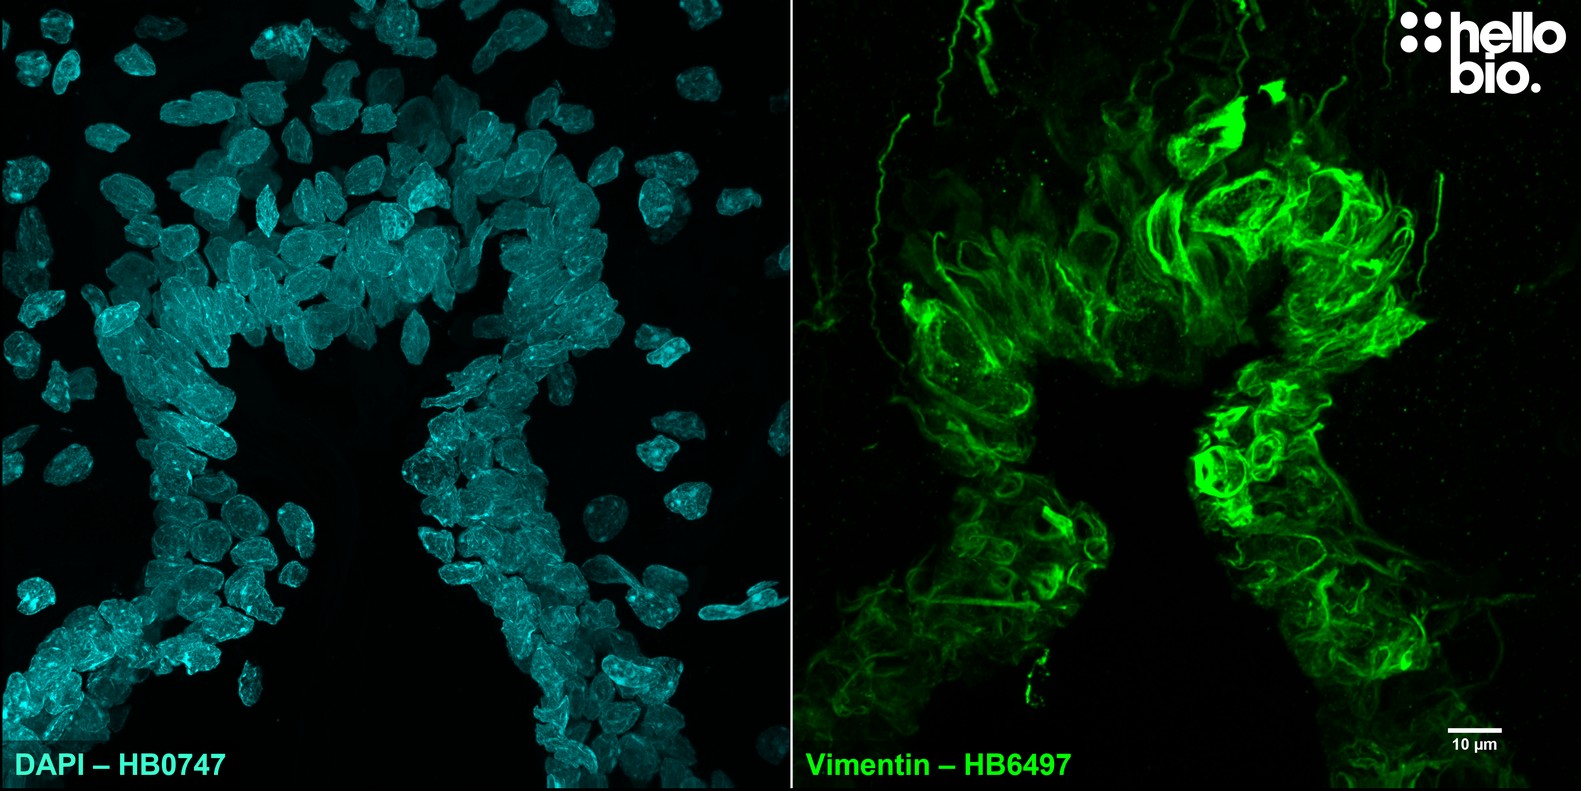 Figure 10. Vimentin expression revealed around the edges of cerebral ventricles in rat brain.